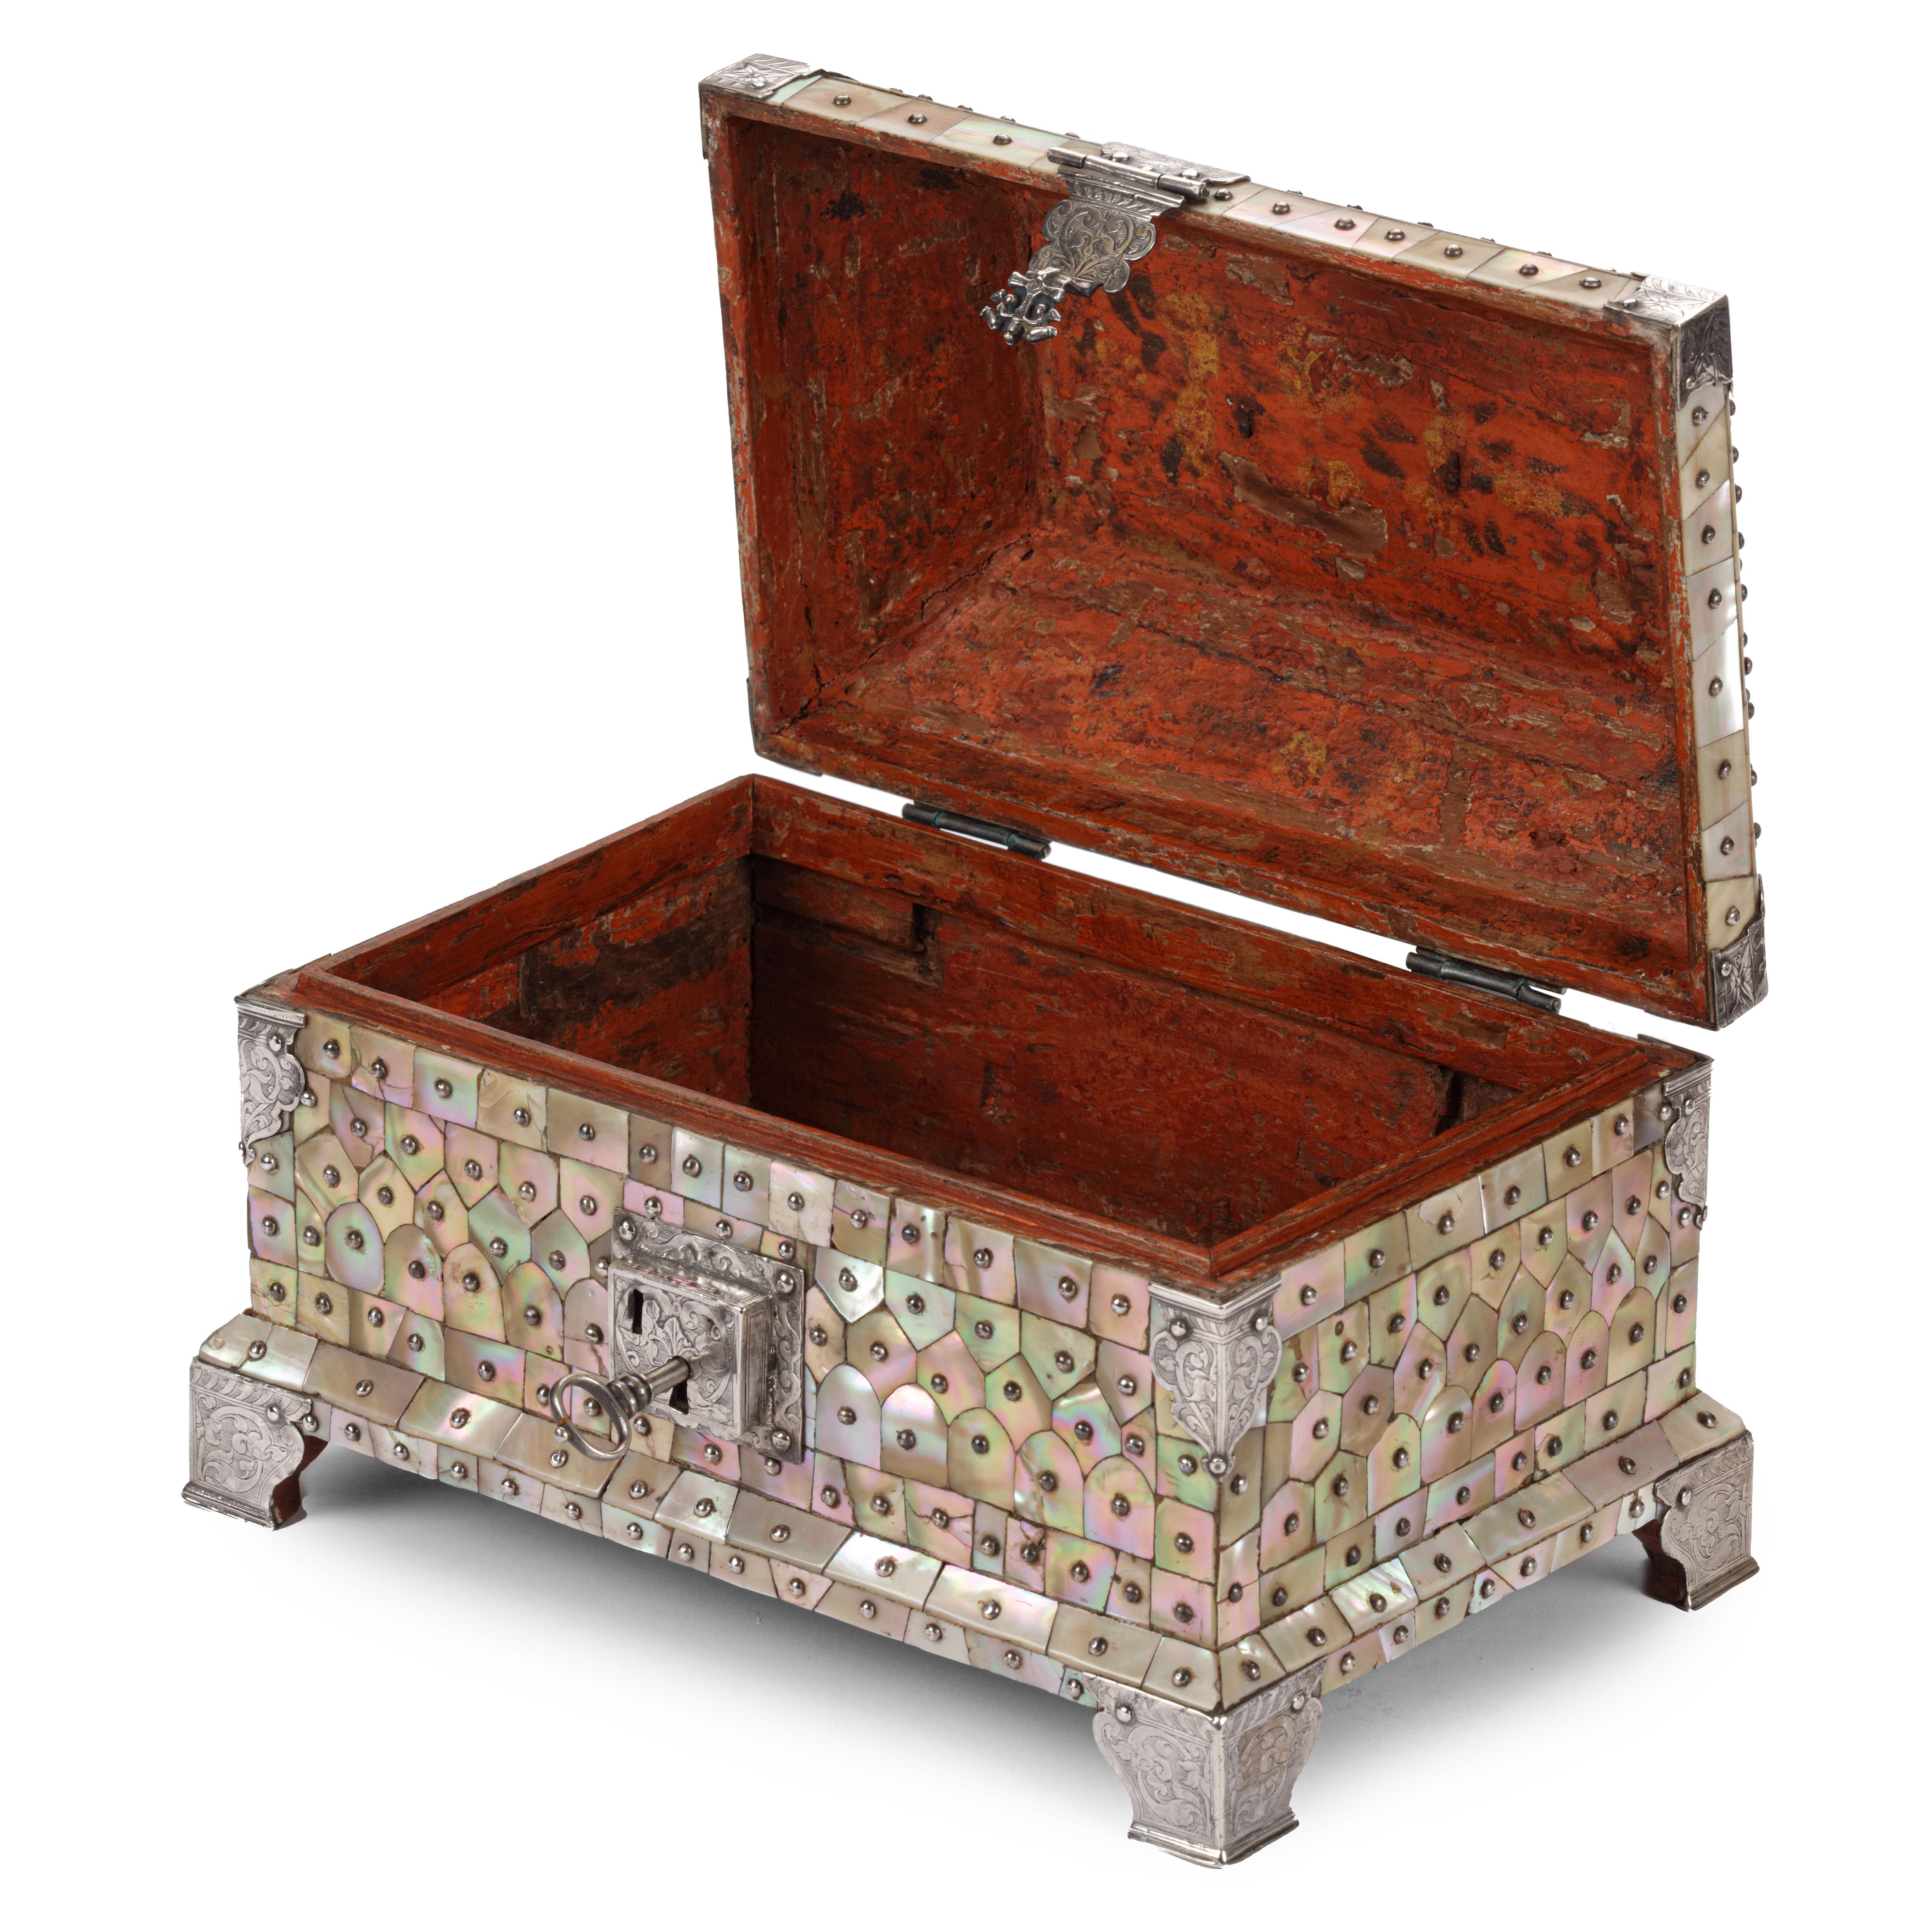 18th Century and Earlier 16th-Century Indo-Portuguese Colonial Mother-of-pearl Gujarat Casket For Sale